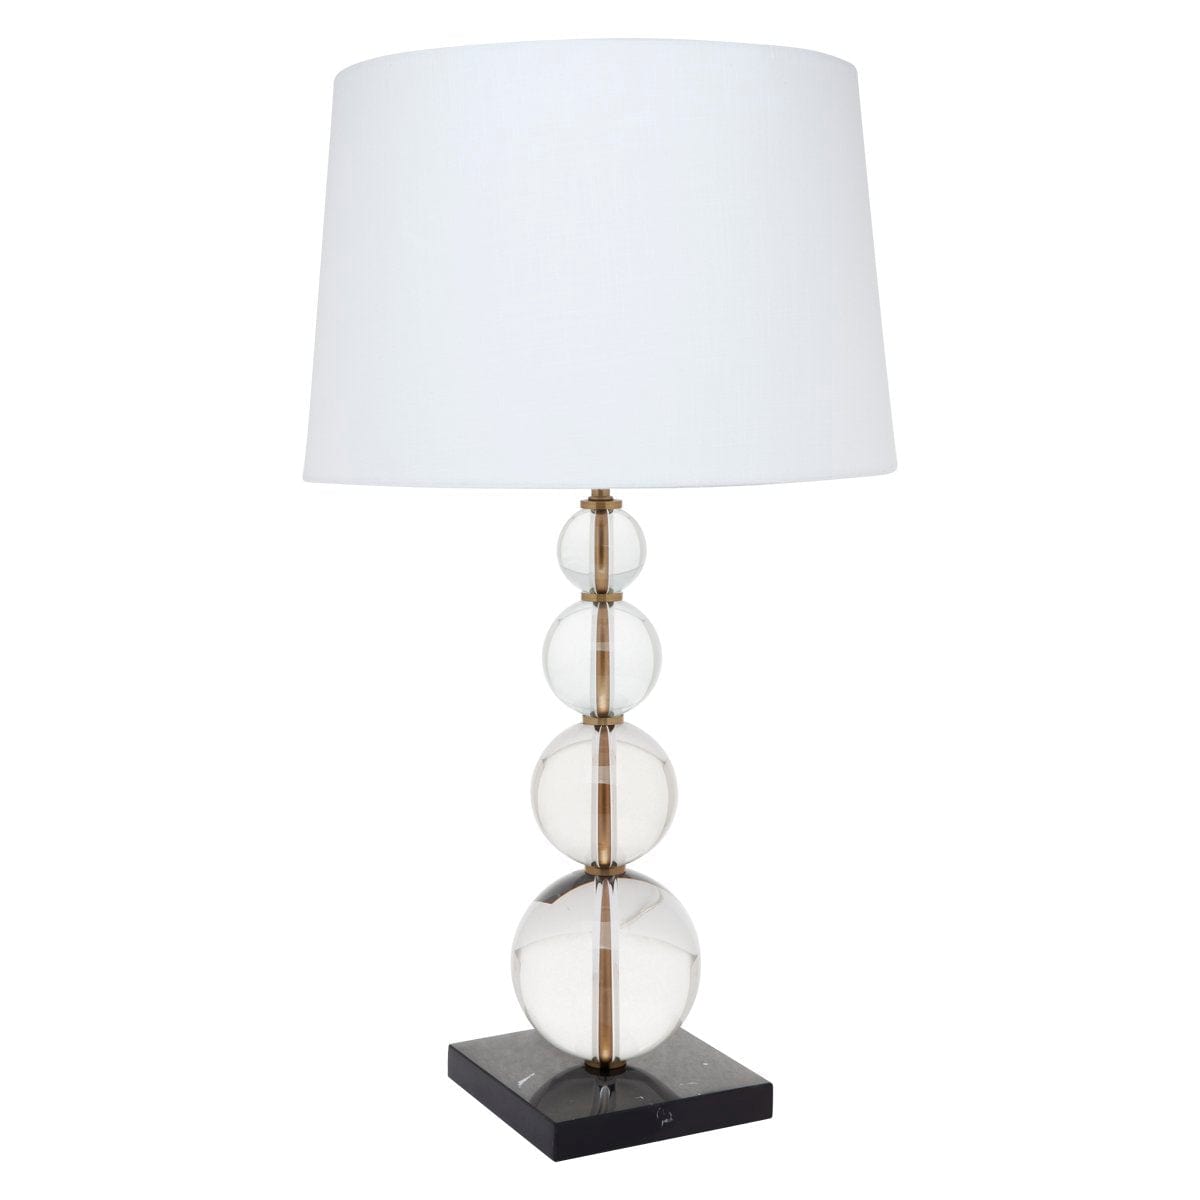 CAFE LIGHTING & LIVING Table Lamp Gabrielle Crystal Table Lamp B11757